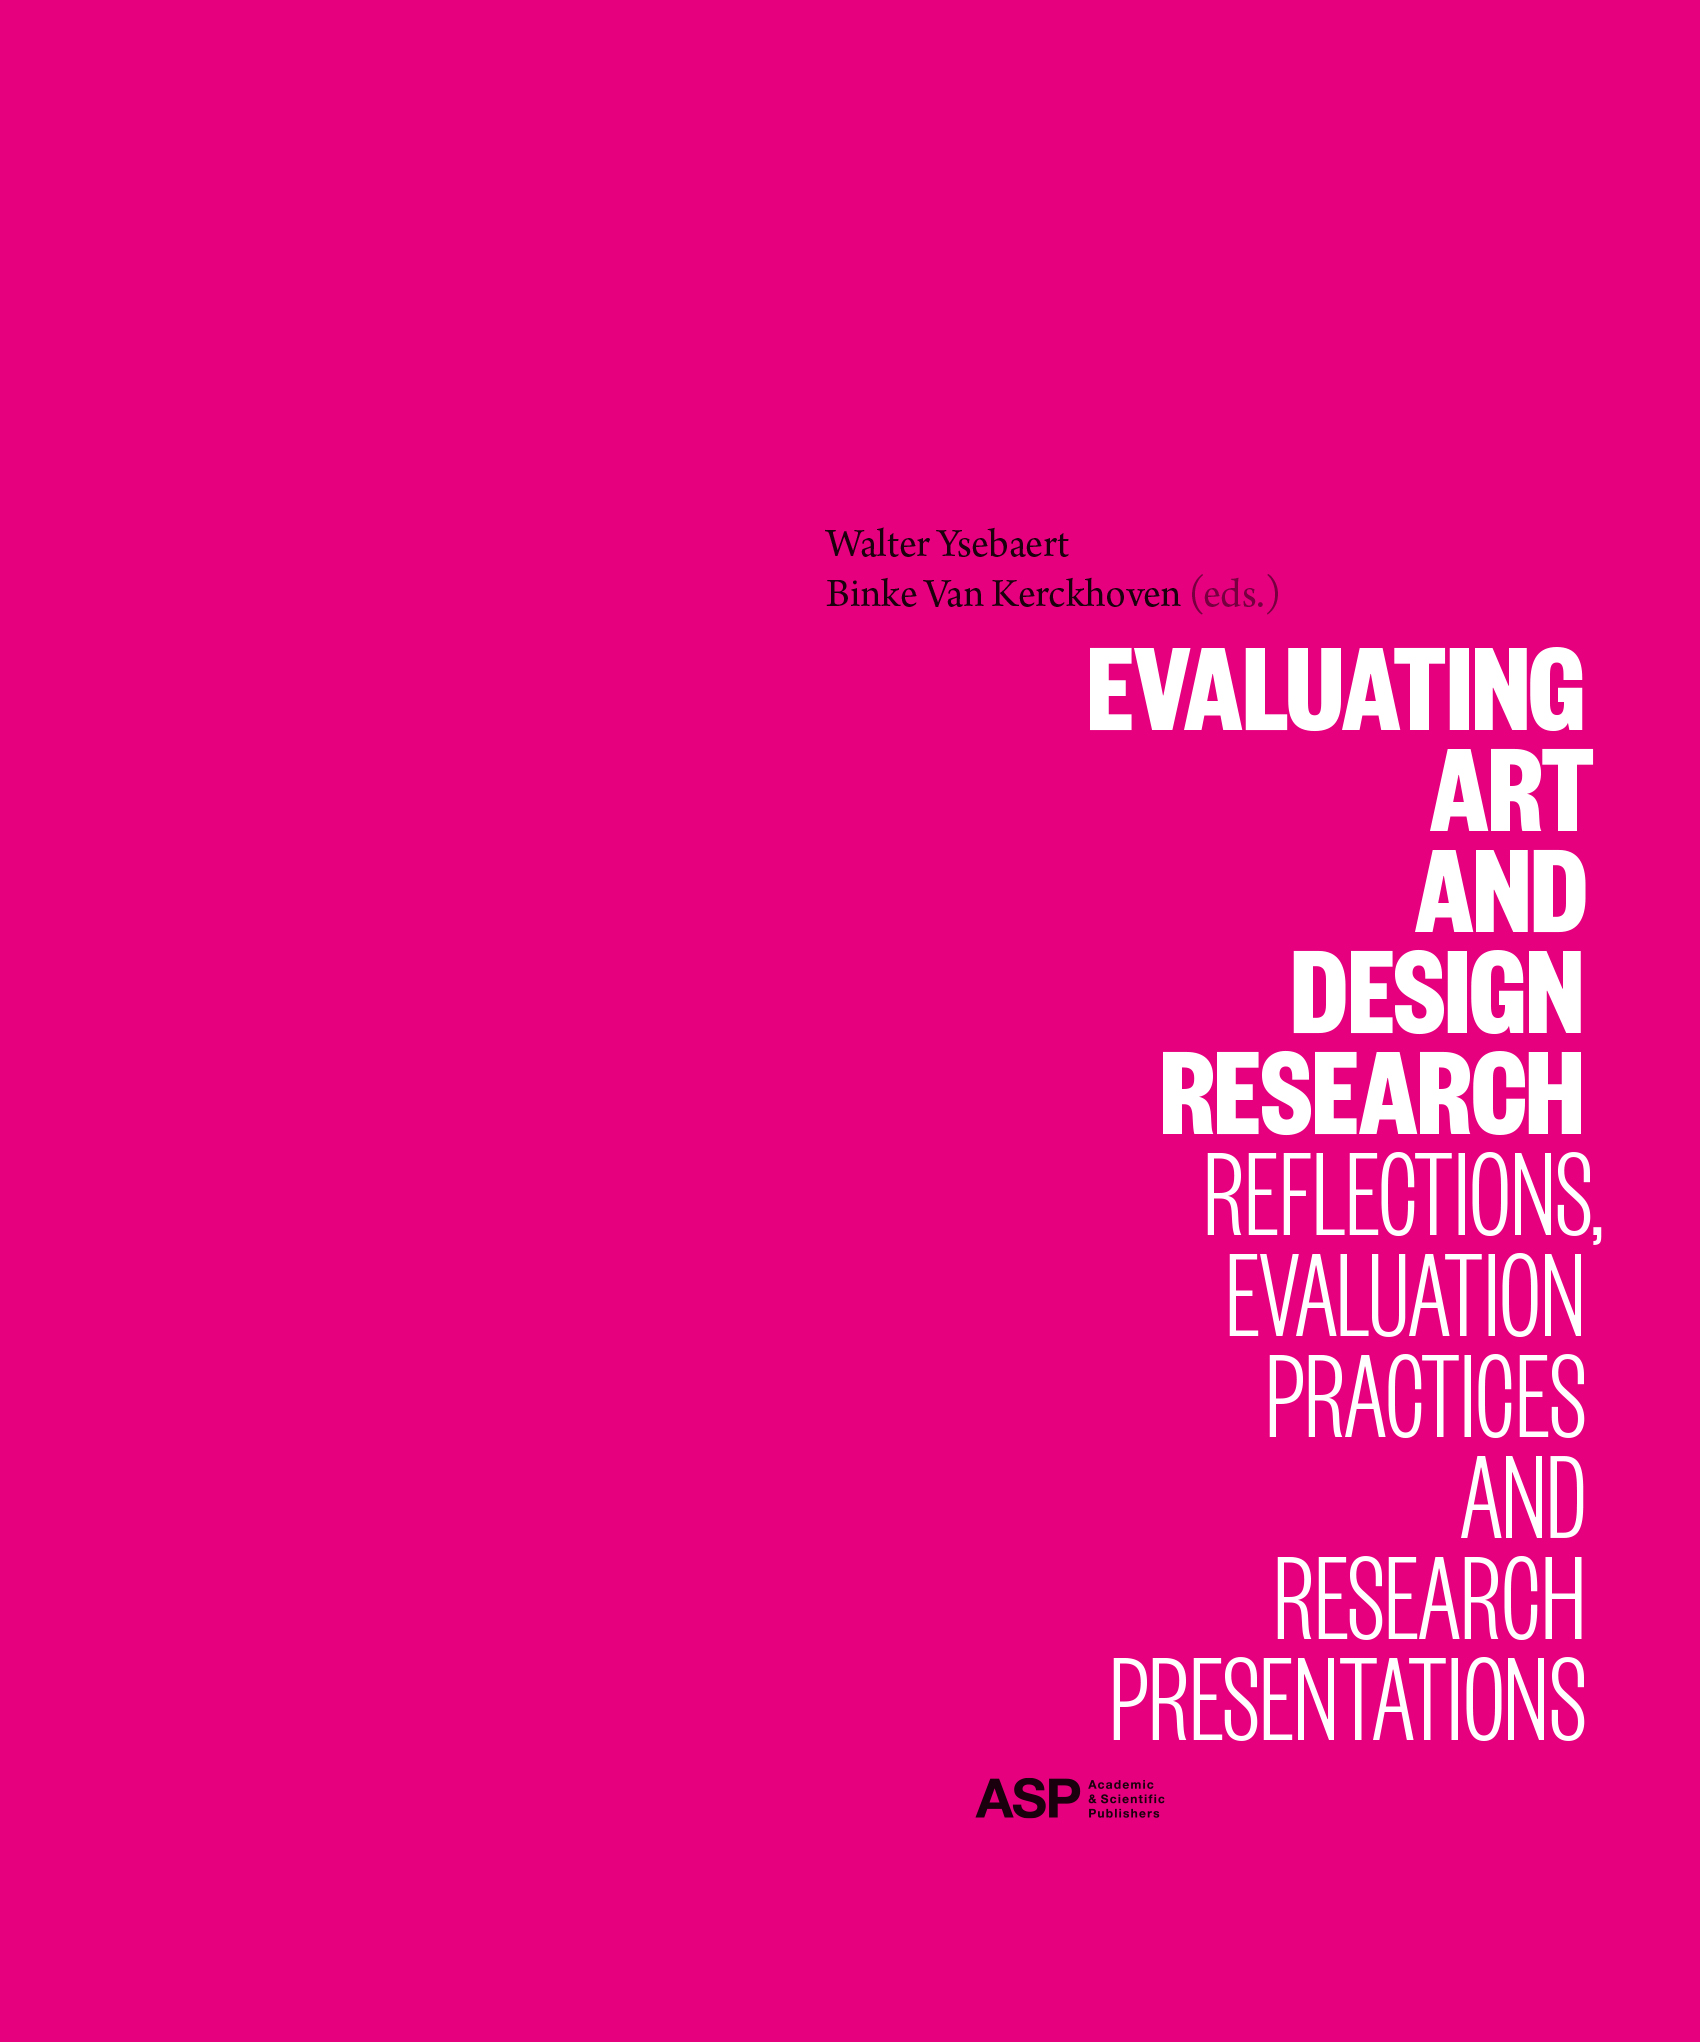 EVALUATING ART AND DESIGN RESEARCH